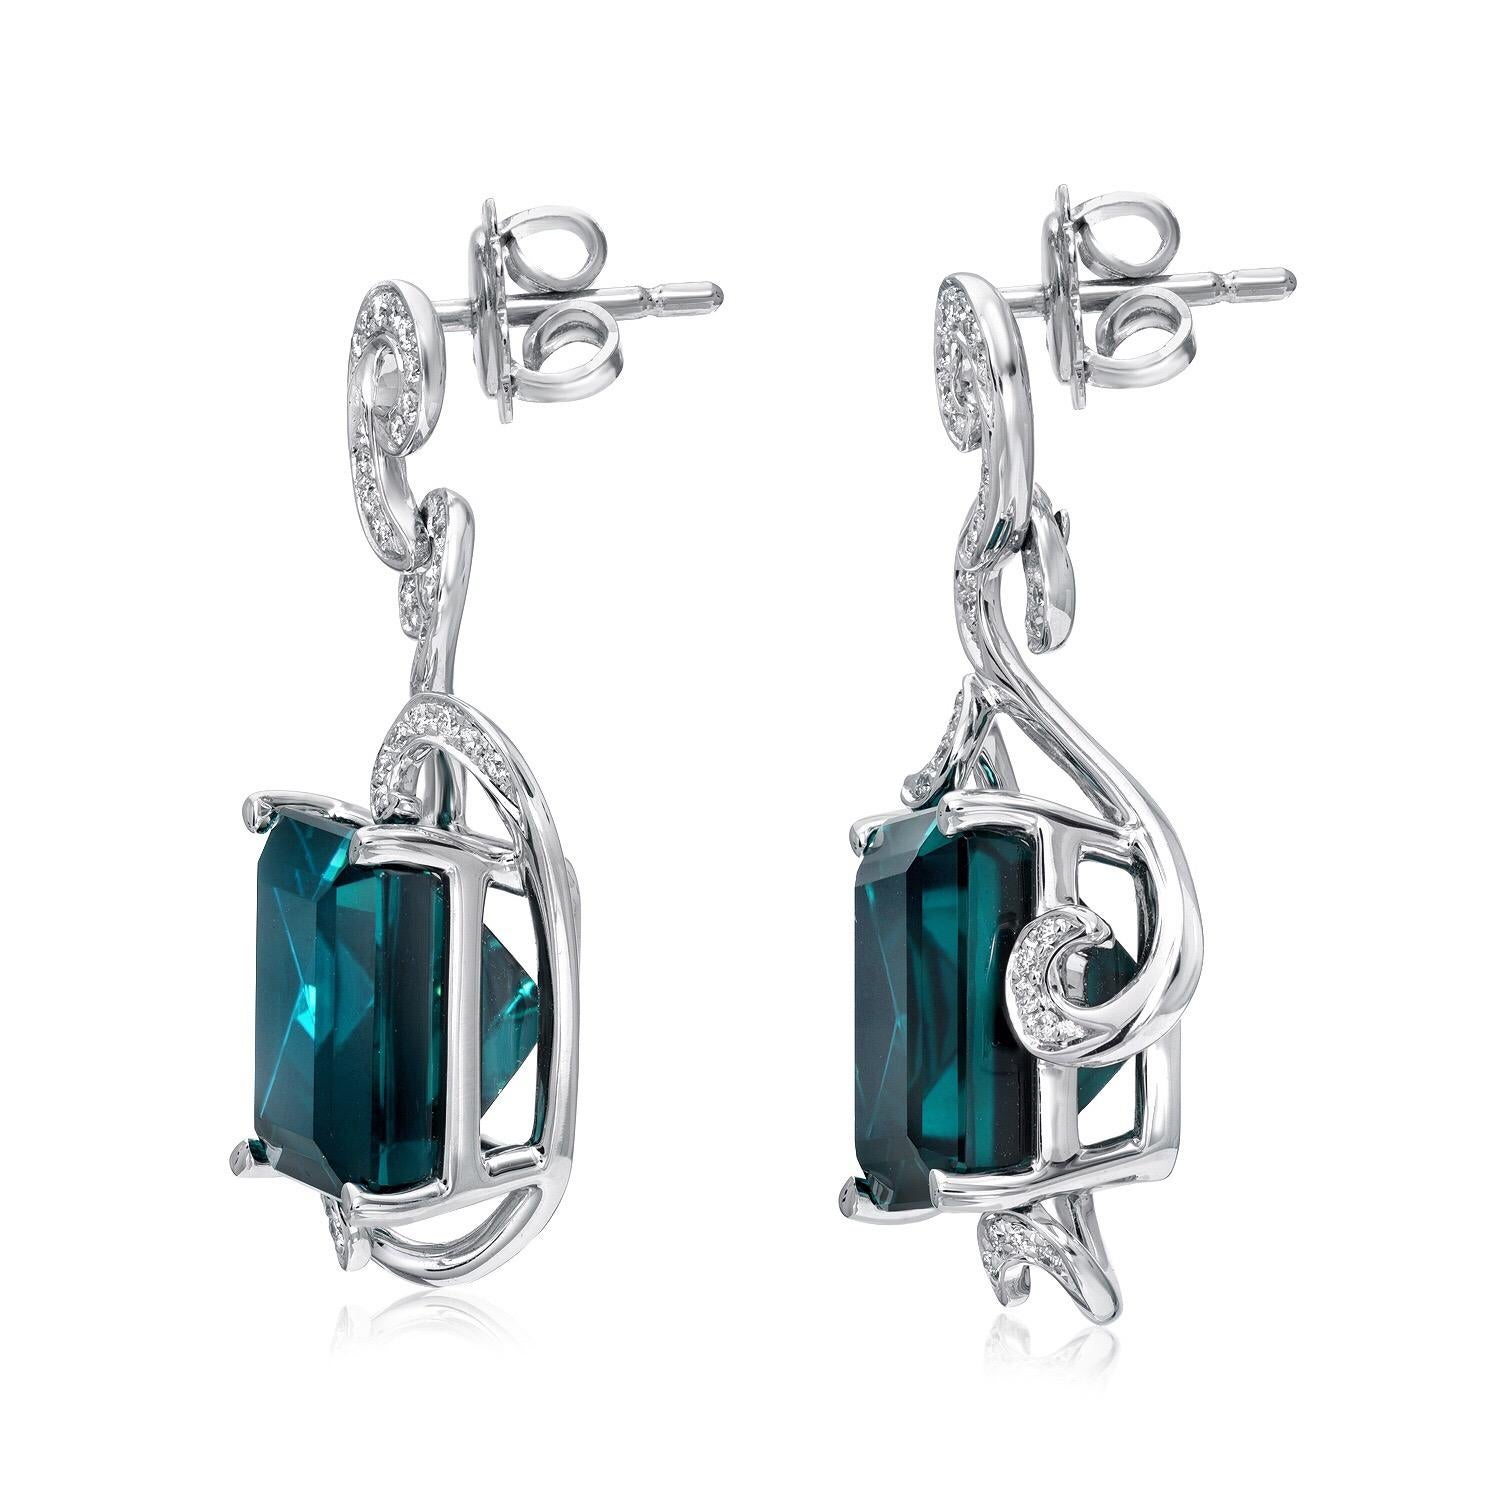 Indicolite Tourmaline earrings, set with a unique emerald cut pair of sea foam greenish blue Indicolite Tourmalines weighing a total of 12.98 carats, and adorned by a total of 0.24 carats of round brilliant diamonds, in 18K white gold.
Drop earrings